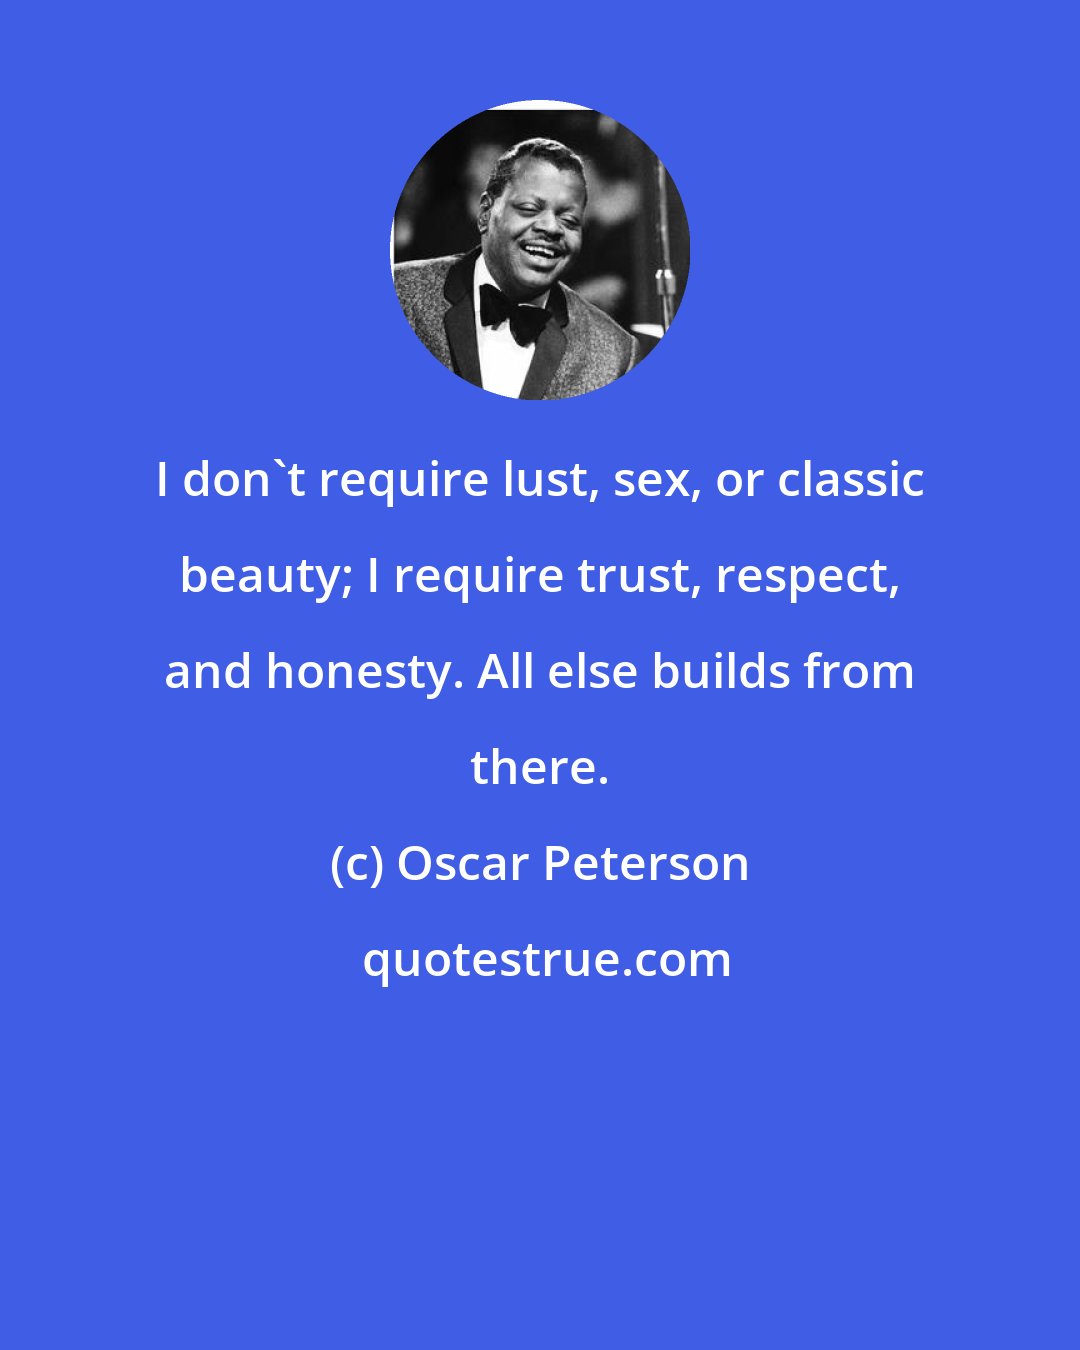 Oscar Peterson: I don't require lust, sex, or classic beauty; I require trust, respect, and honesty. All else builds from there.